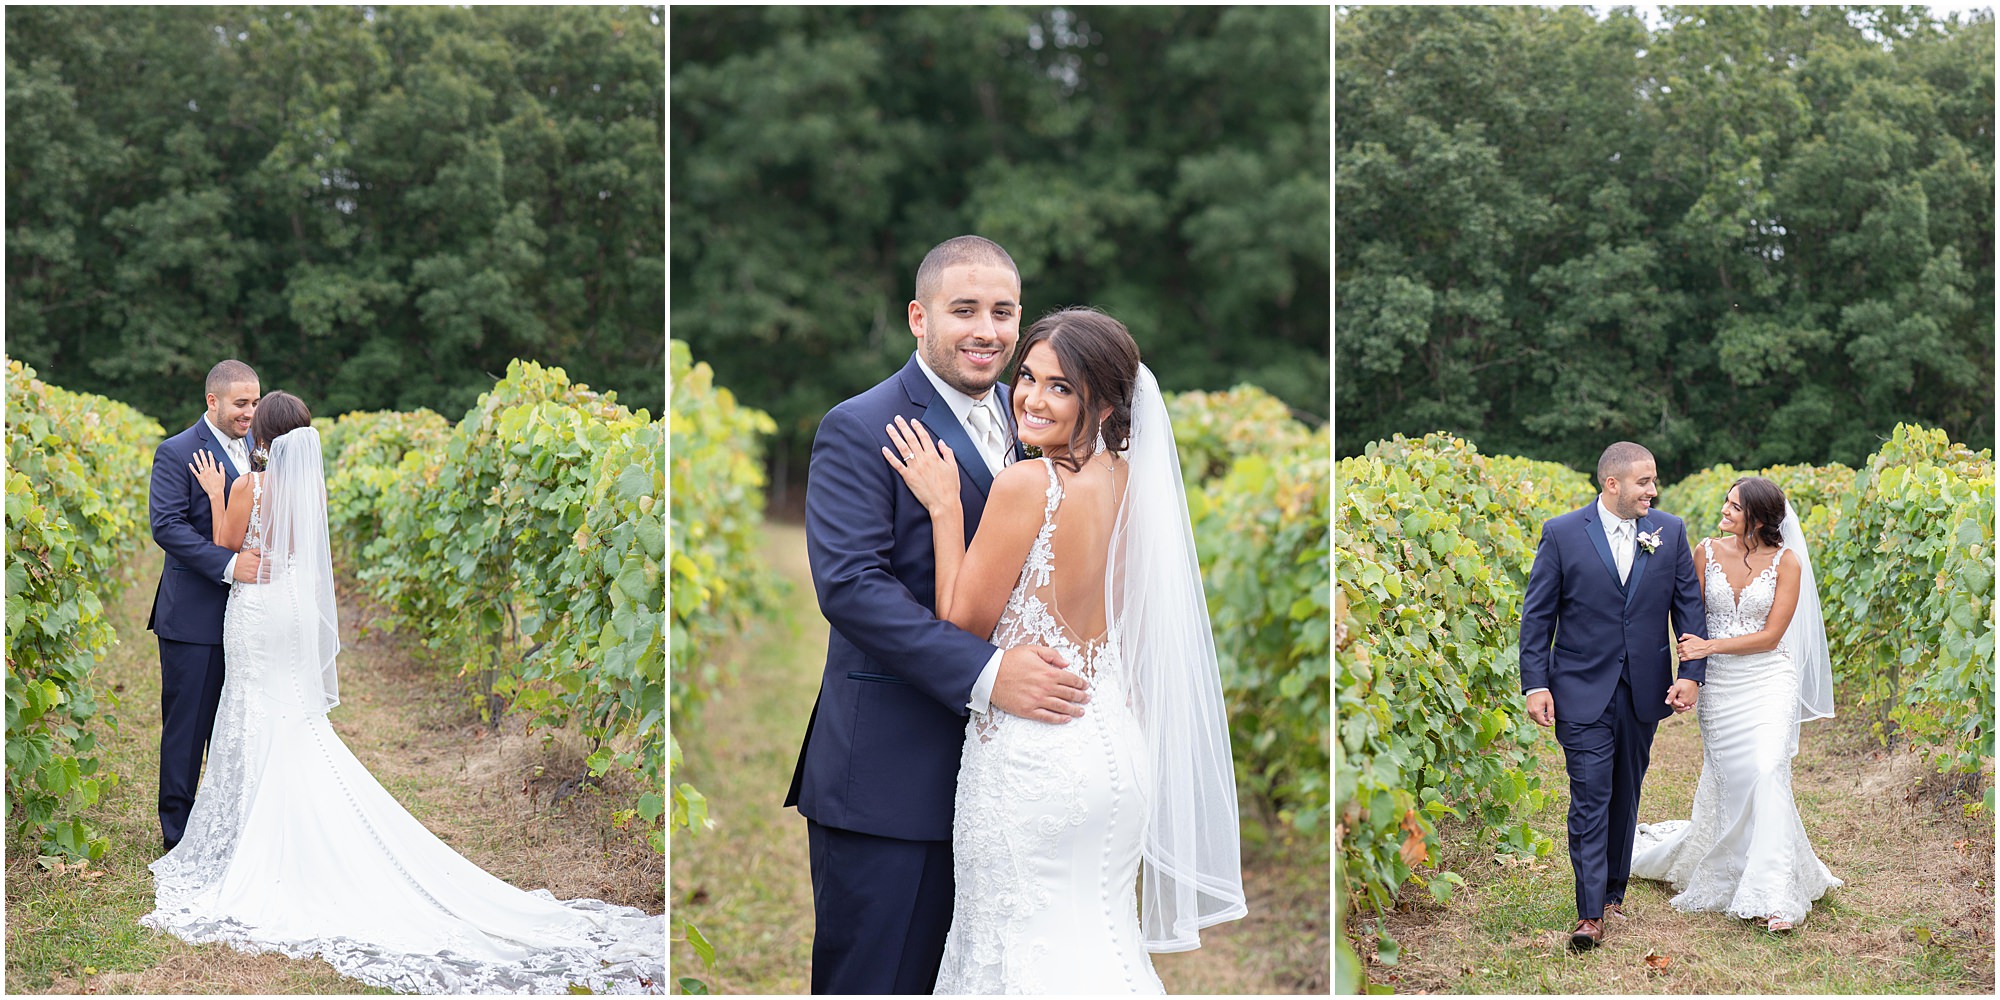 Coree and Stephen had a romantic and romantic Renault Winery wedding